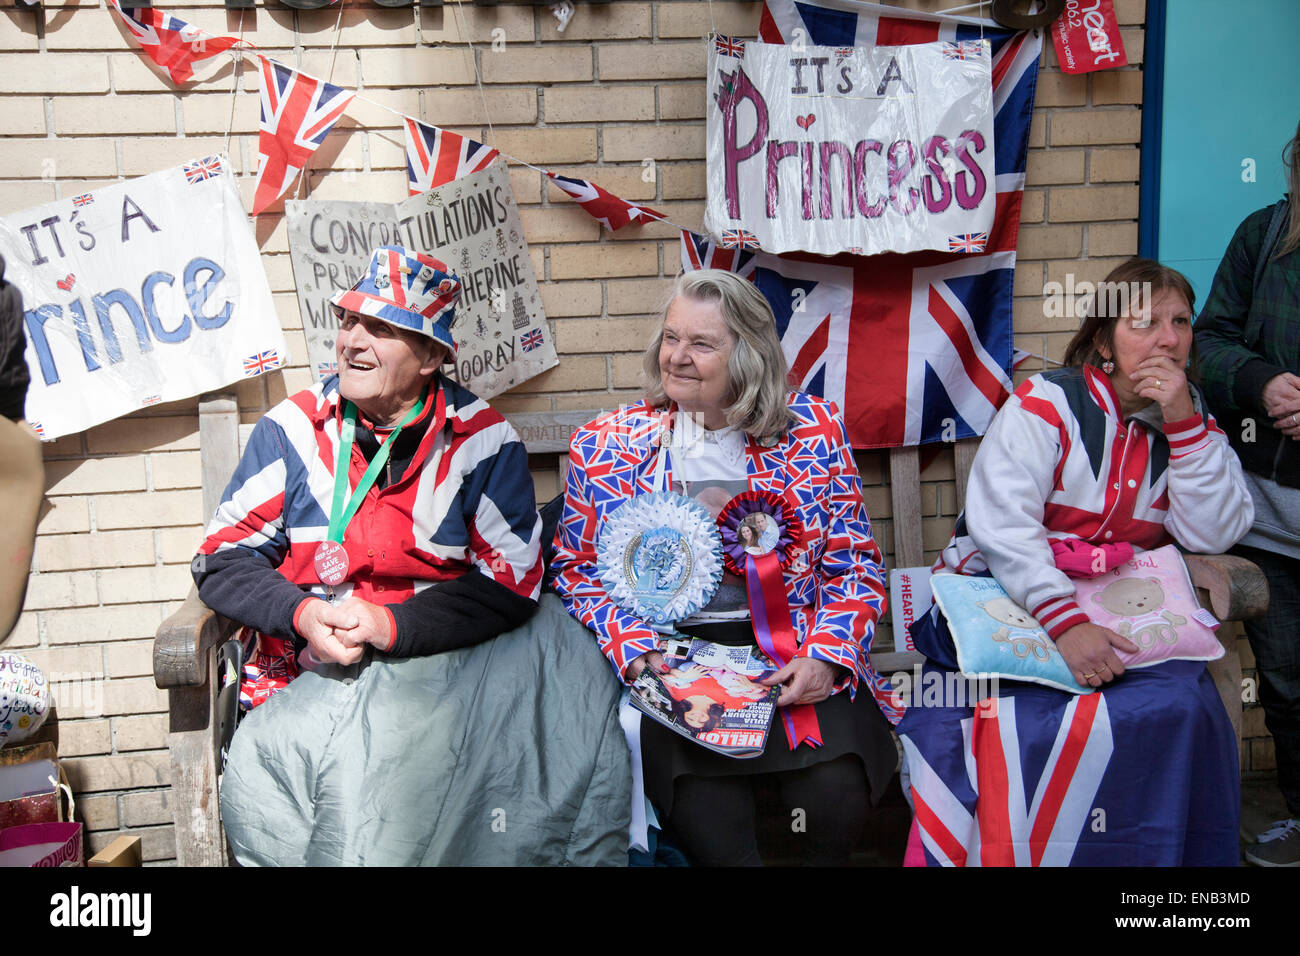 St Mary's Hospital, London, UK. 1st May, 2015. Waiting For 'Arrival' of Royal Baby after Betting Suspended - Fans Wait Outside Ready to Congratulate The Royals on Their Birth Credit:  M.Sobreira/Alamy Live News Stock Photo